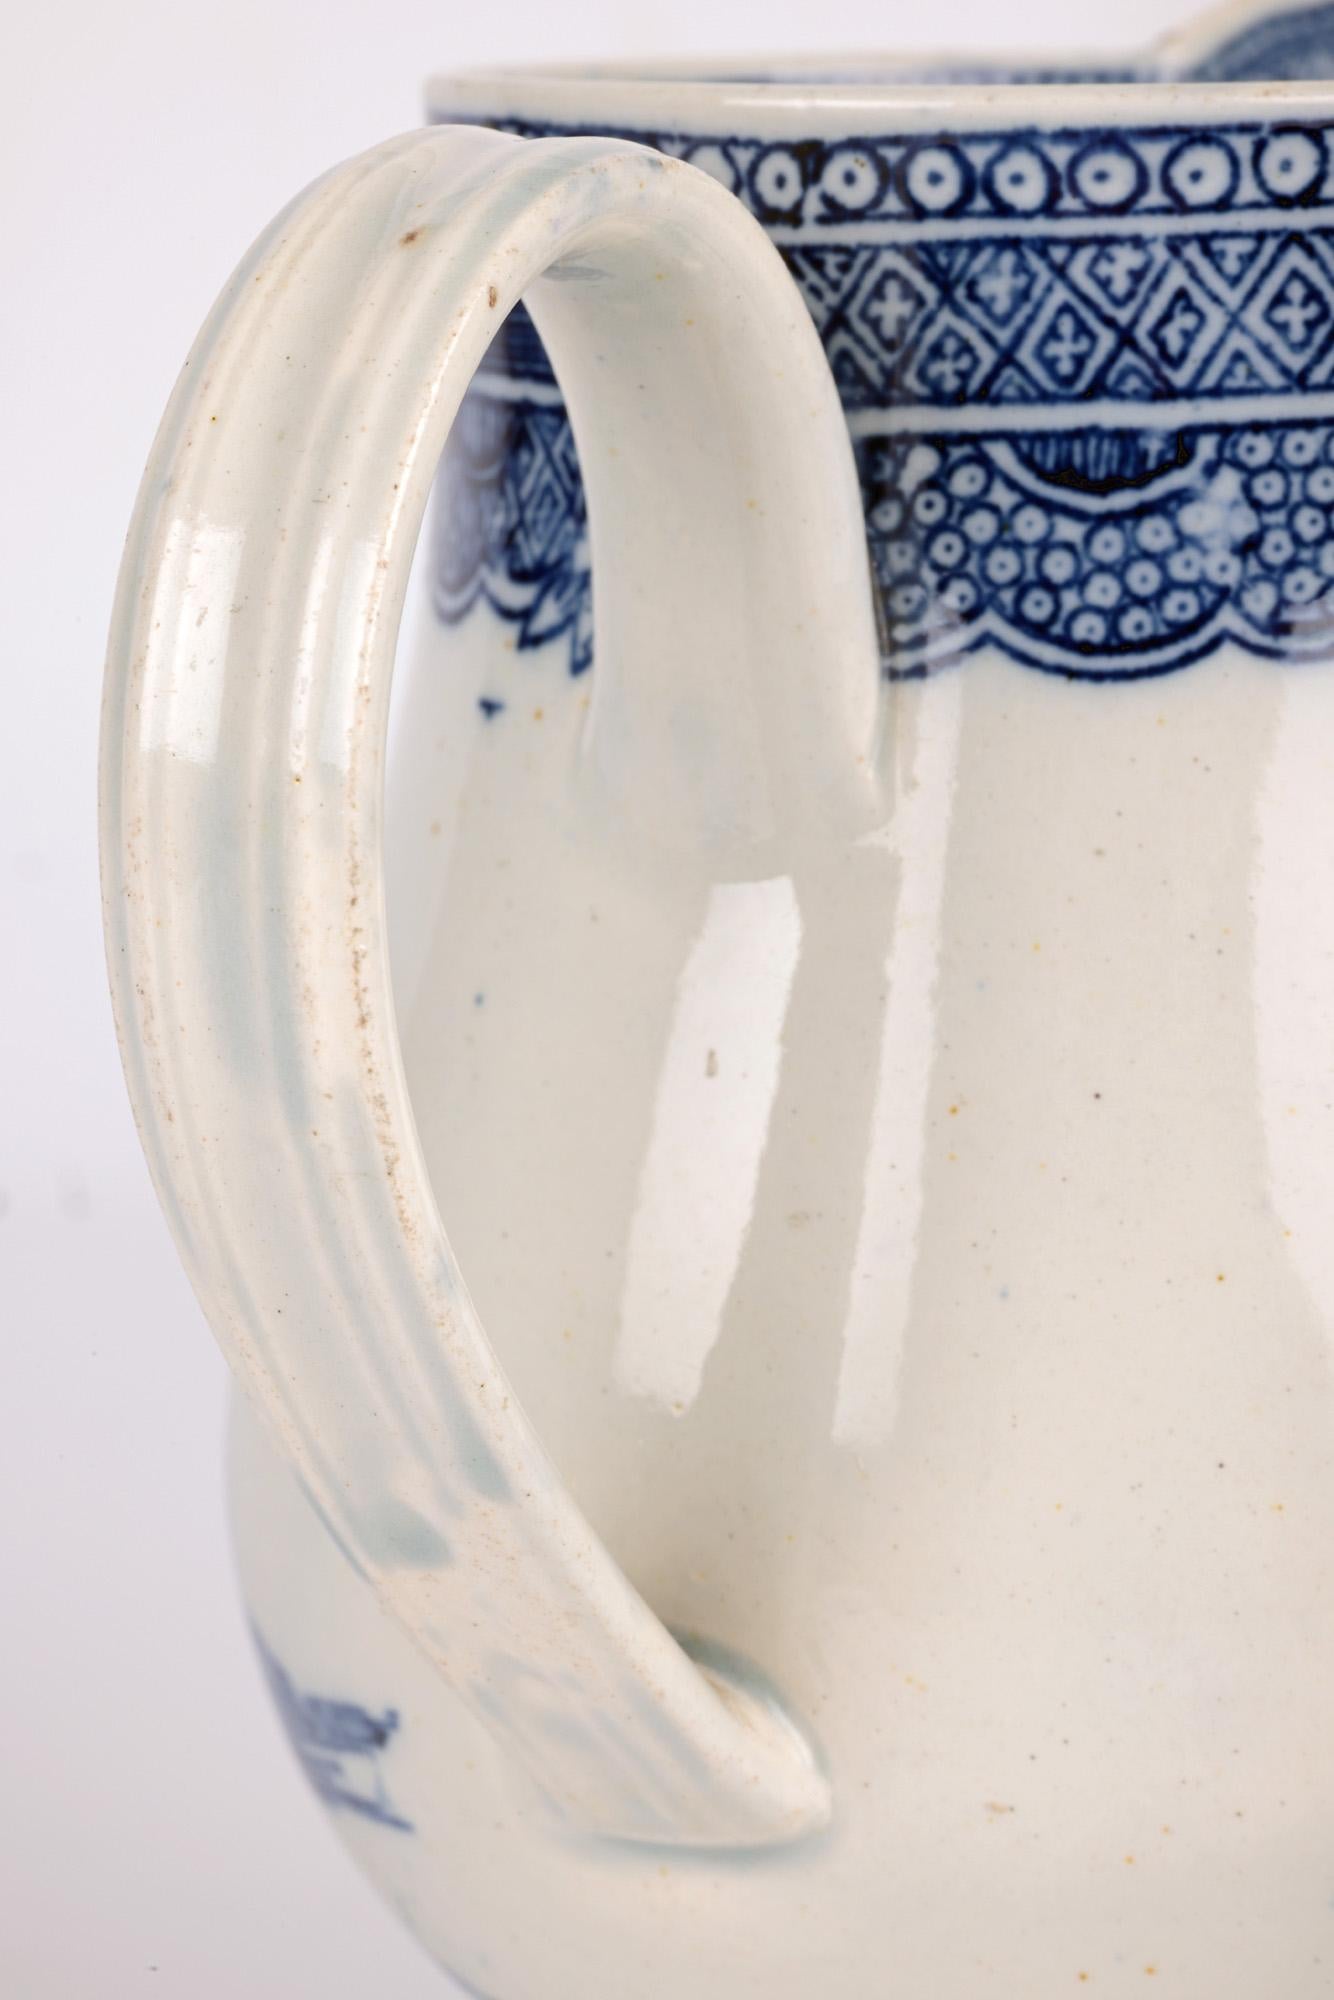 English Pearlware Silver Shape Blue & White Printed Jug In Good Condition For Sale In Bishop's Stortford, Hertfordshire